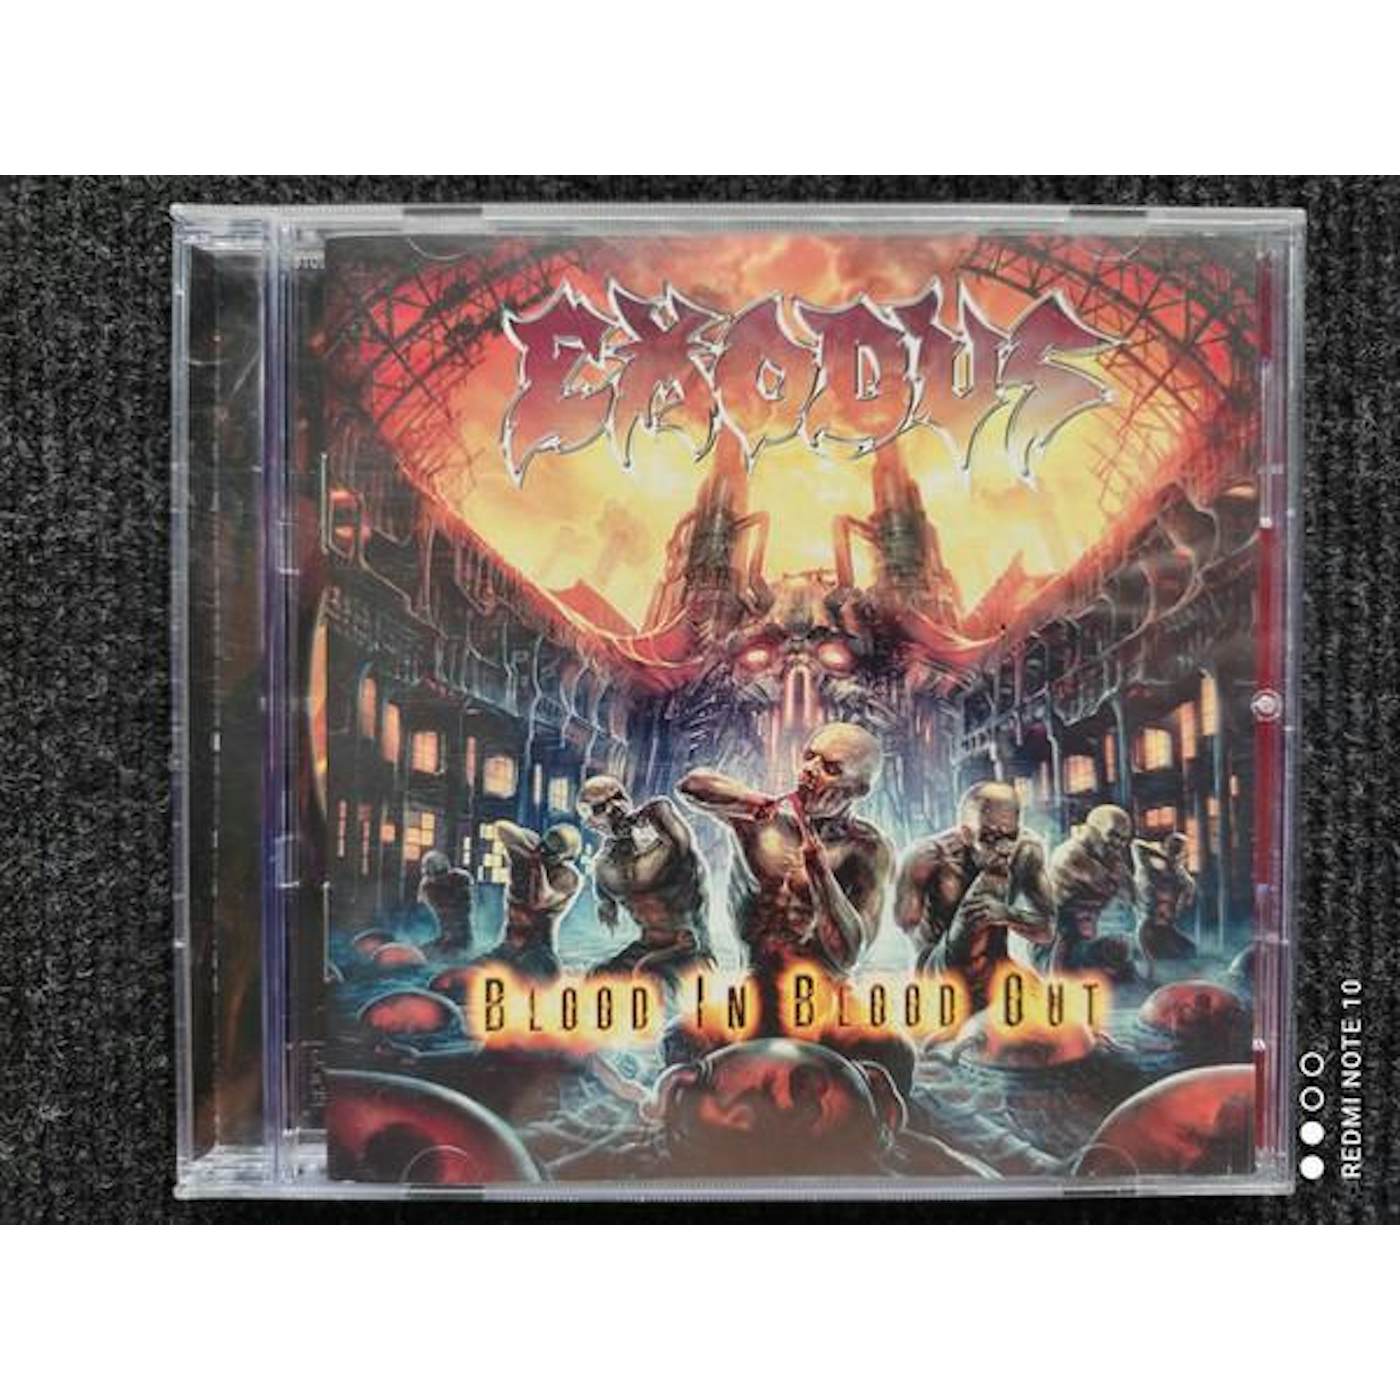 Exodus BLOOD IN BLOOD OUT CD